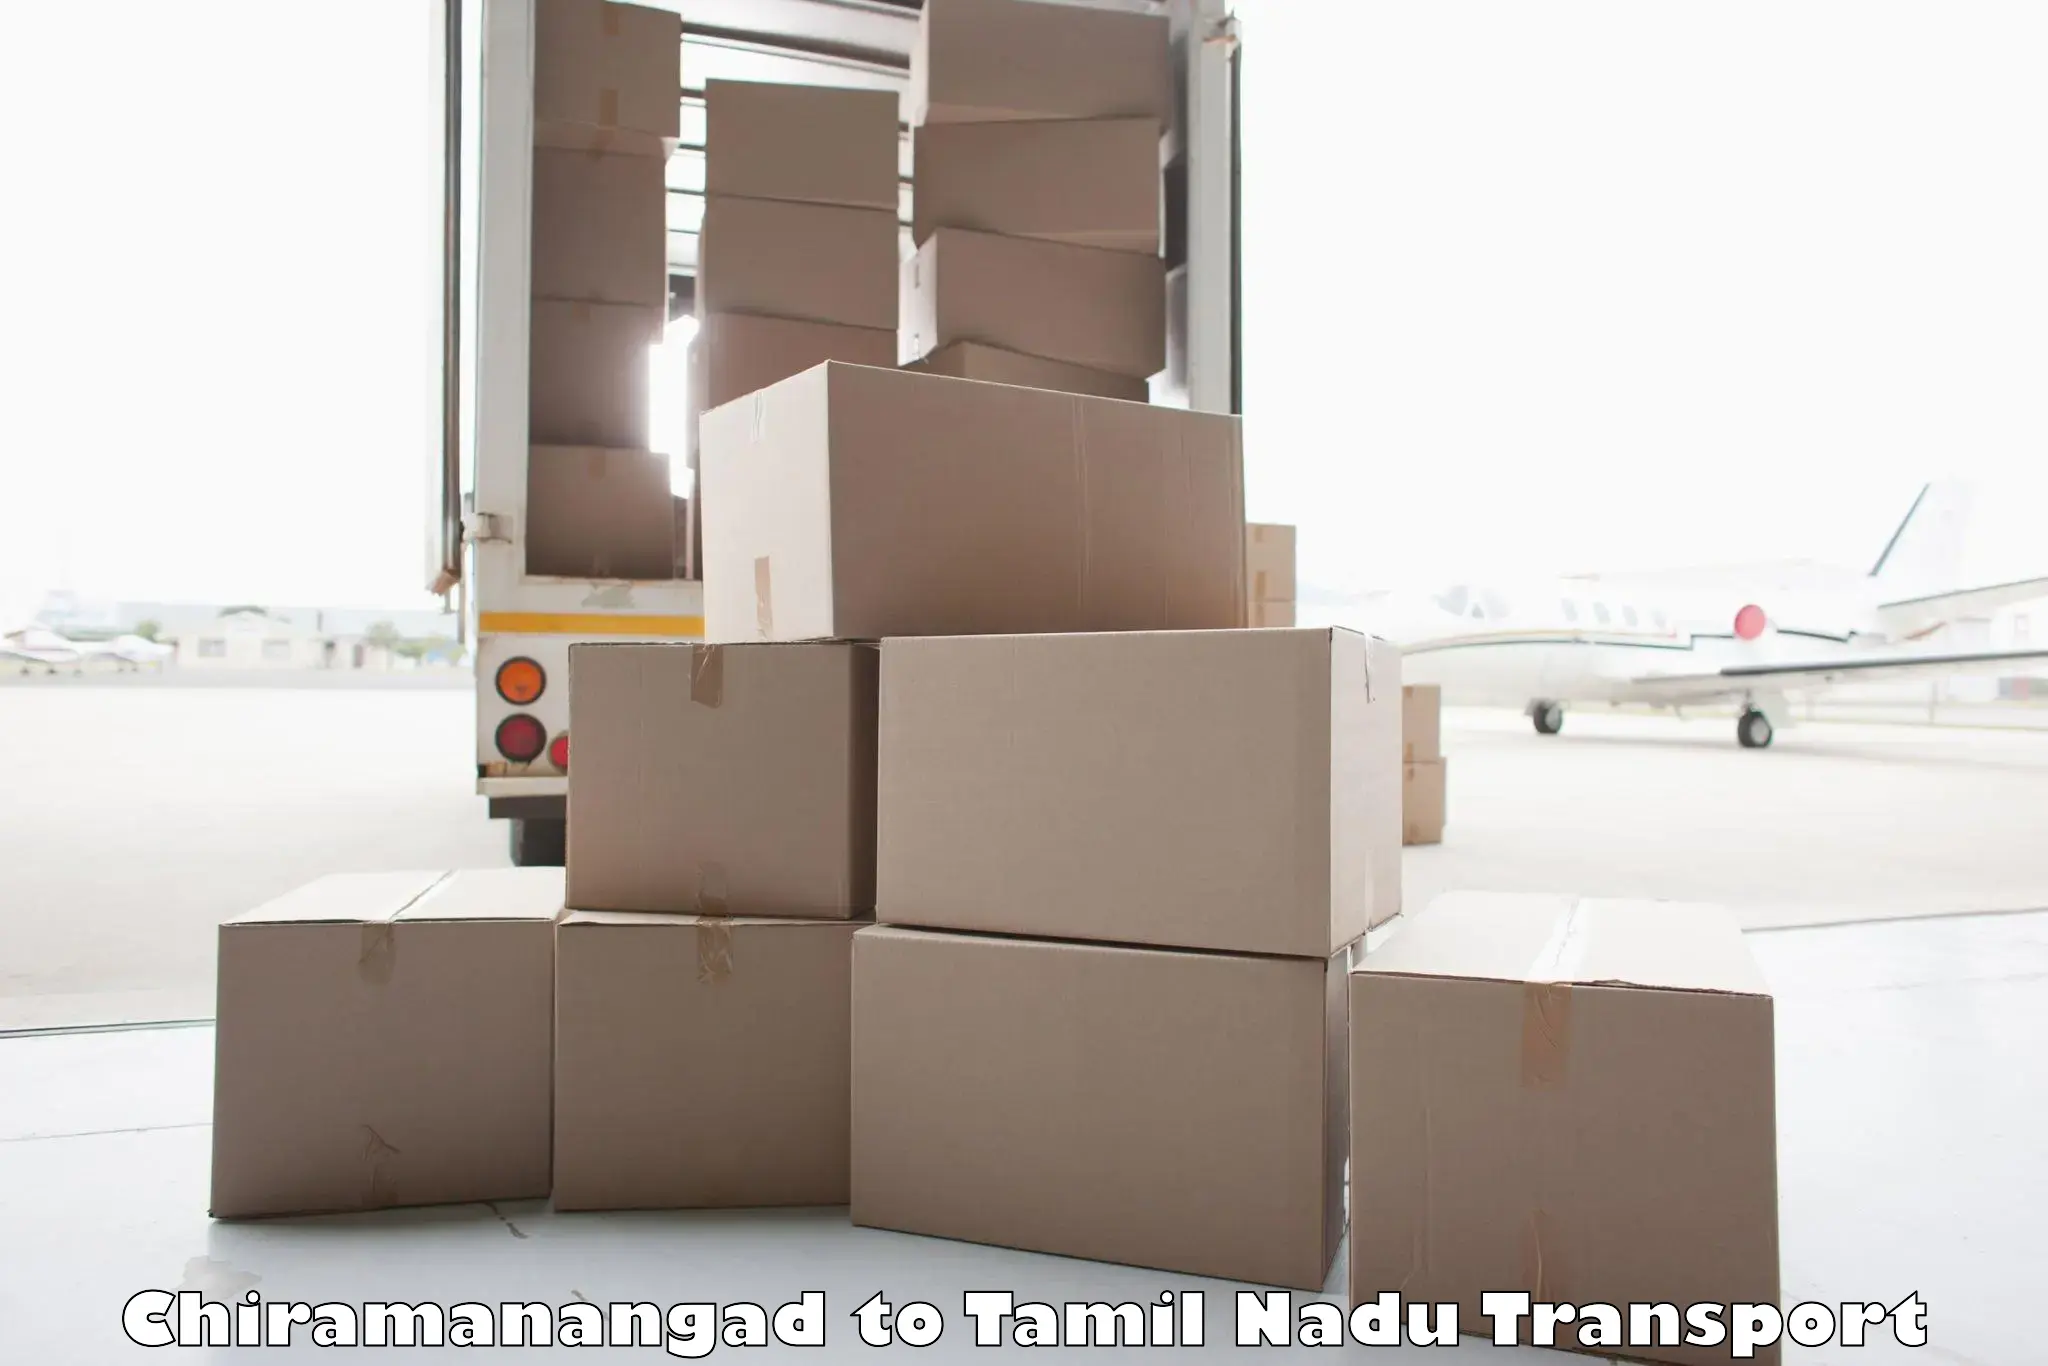 Truck transport companies in India Chiramanangad to Trichy